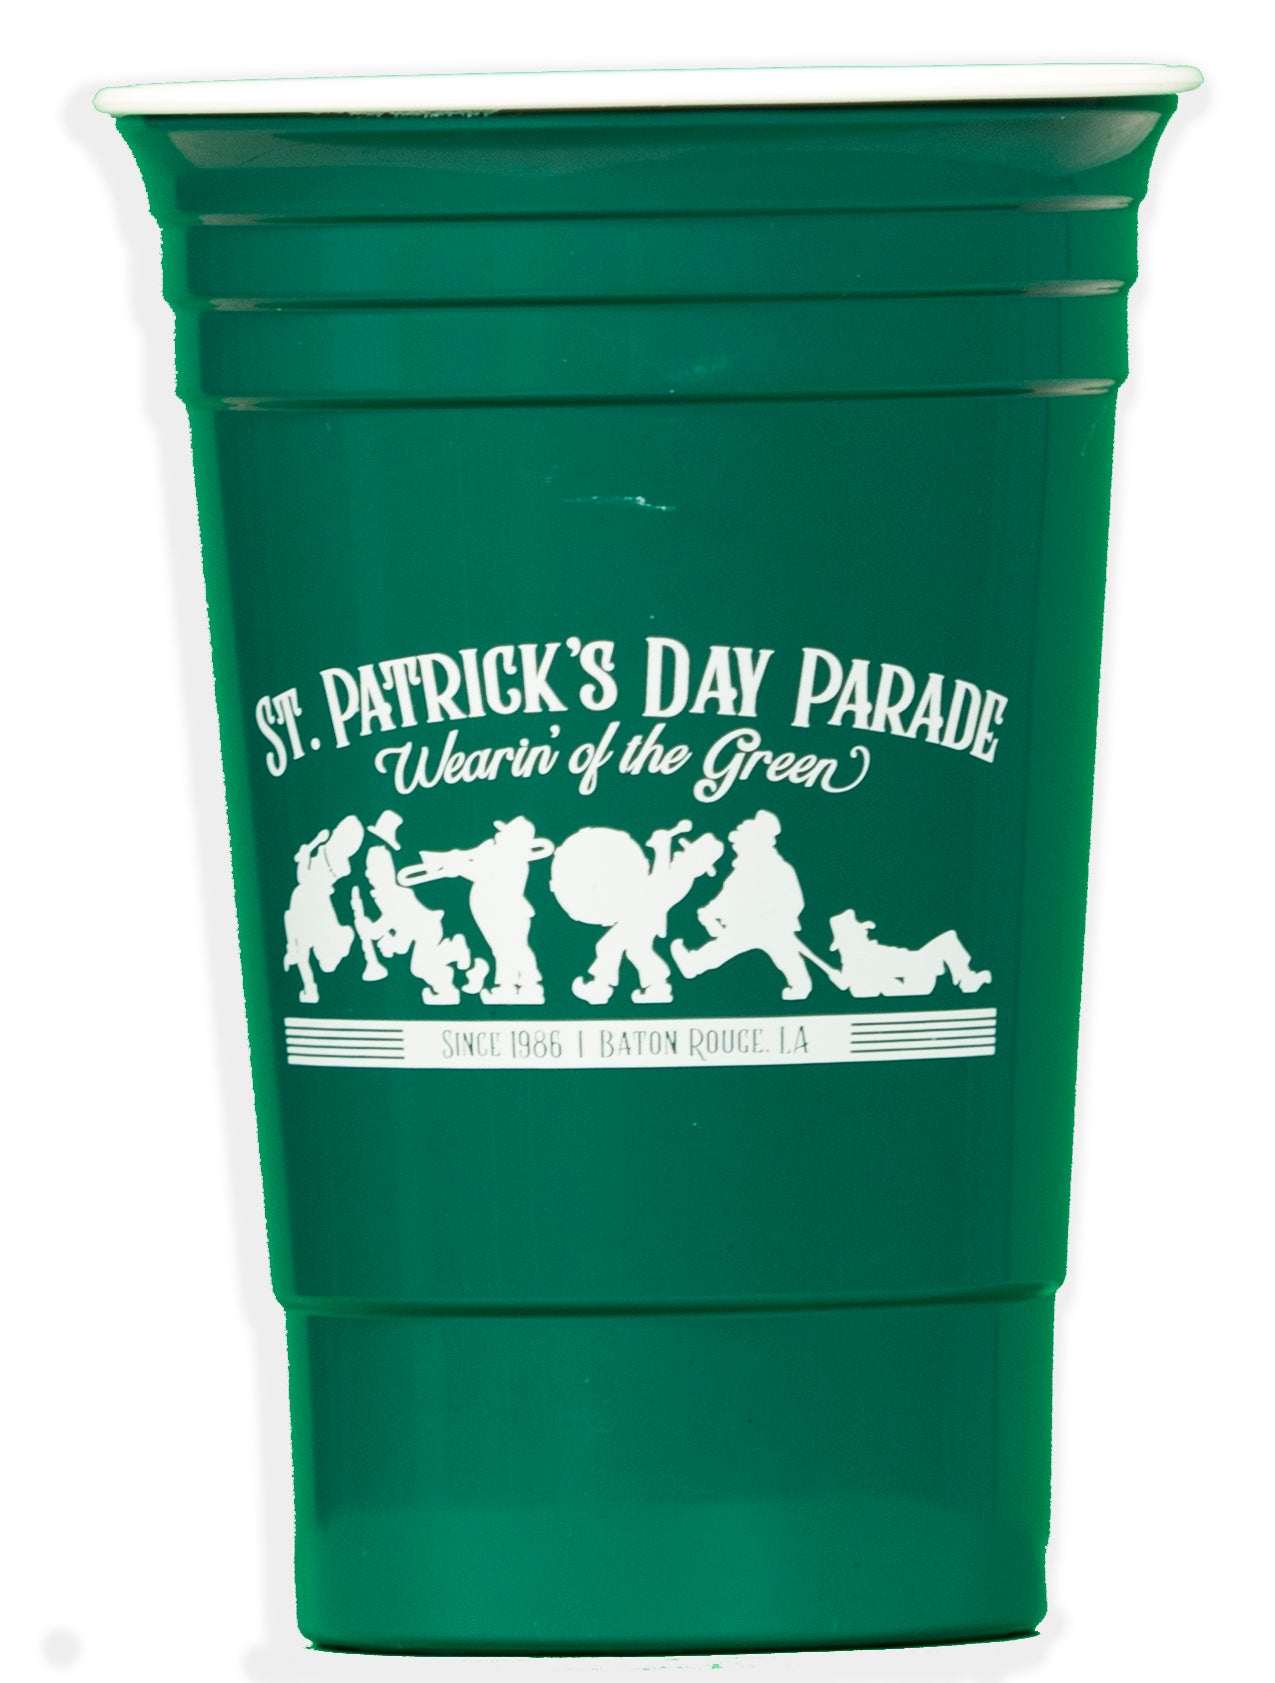 Mockup of the Wearin' of the Green parade cup.